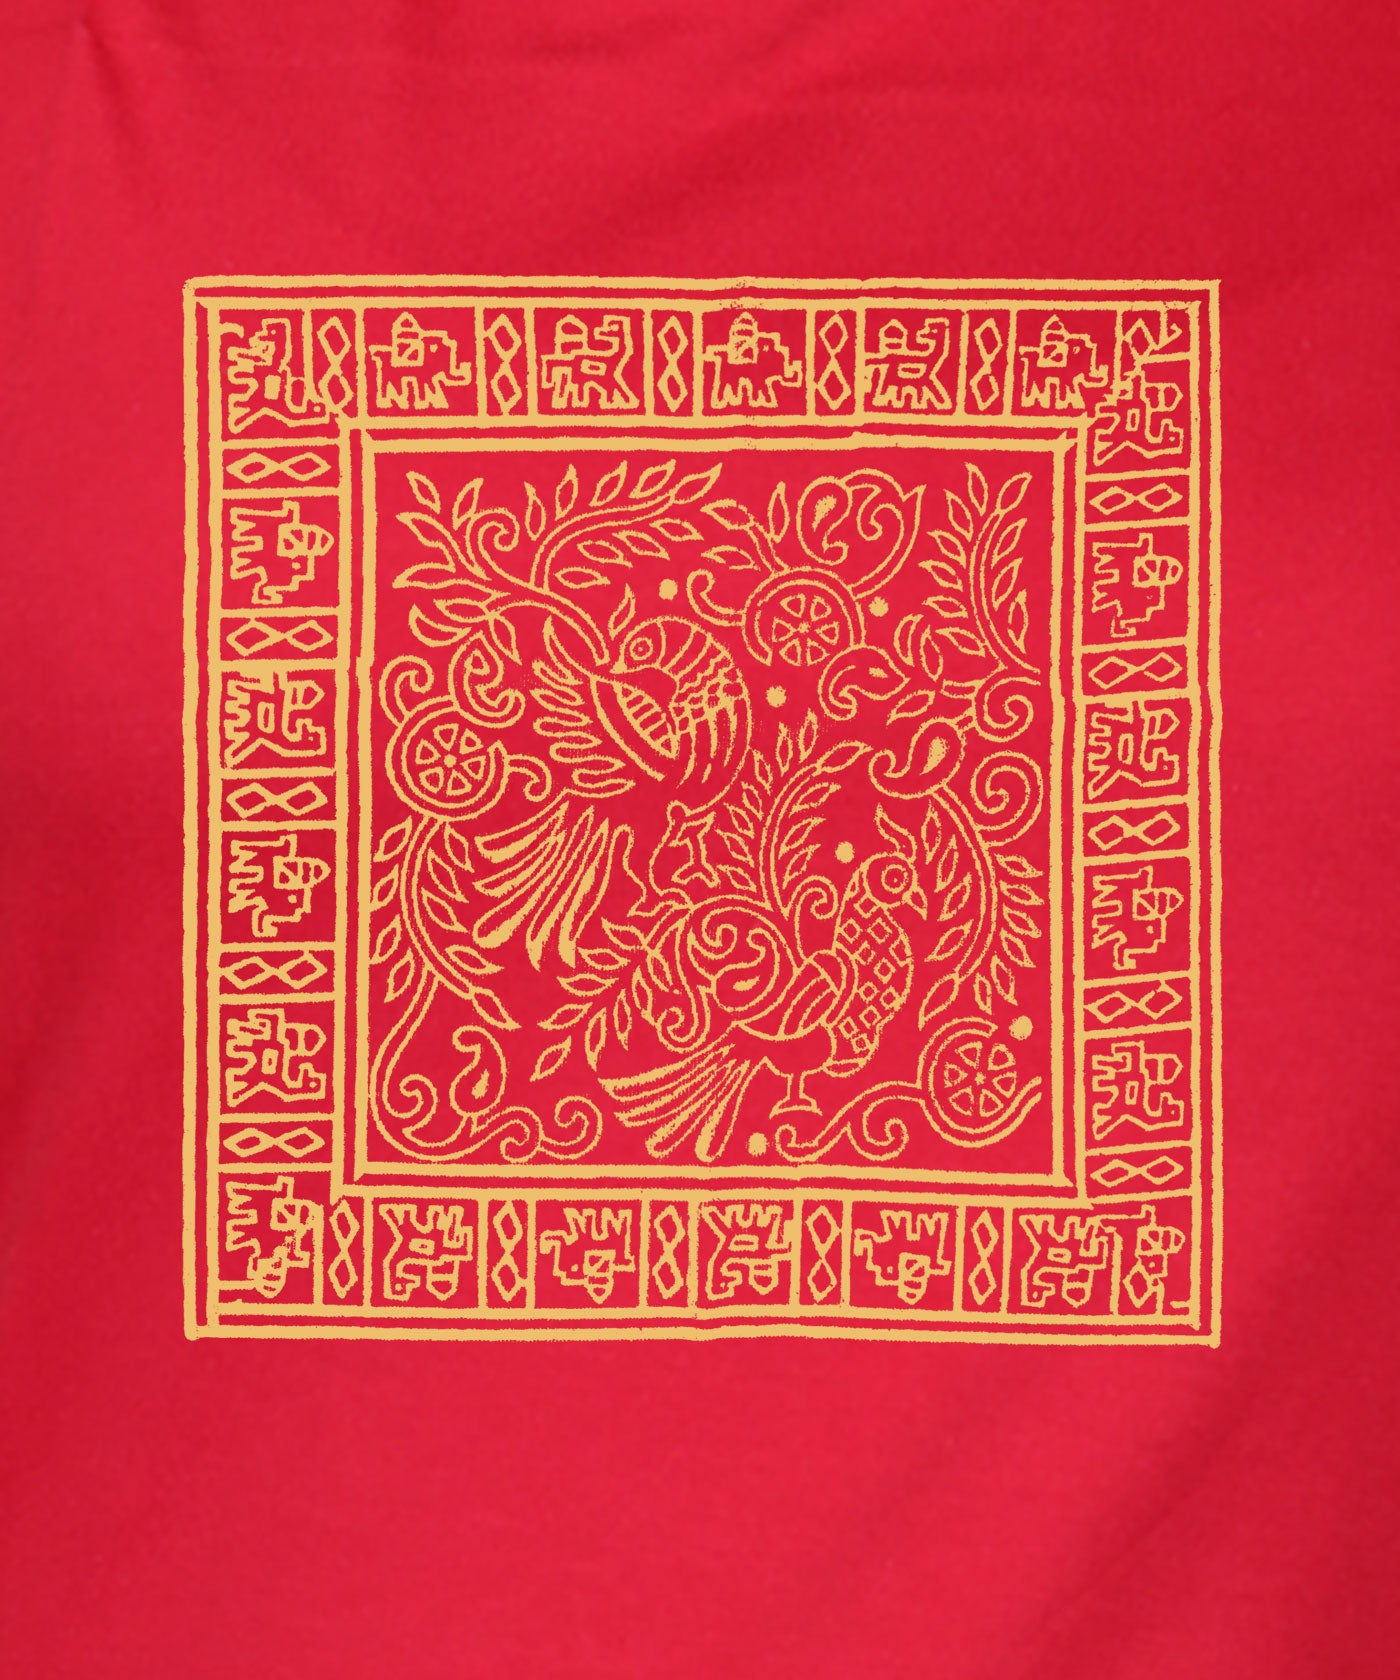 Parrot Square Gallery - Block Print Tees for Women - Red